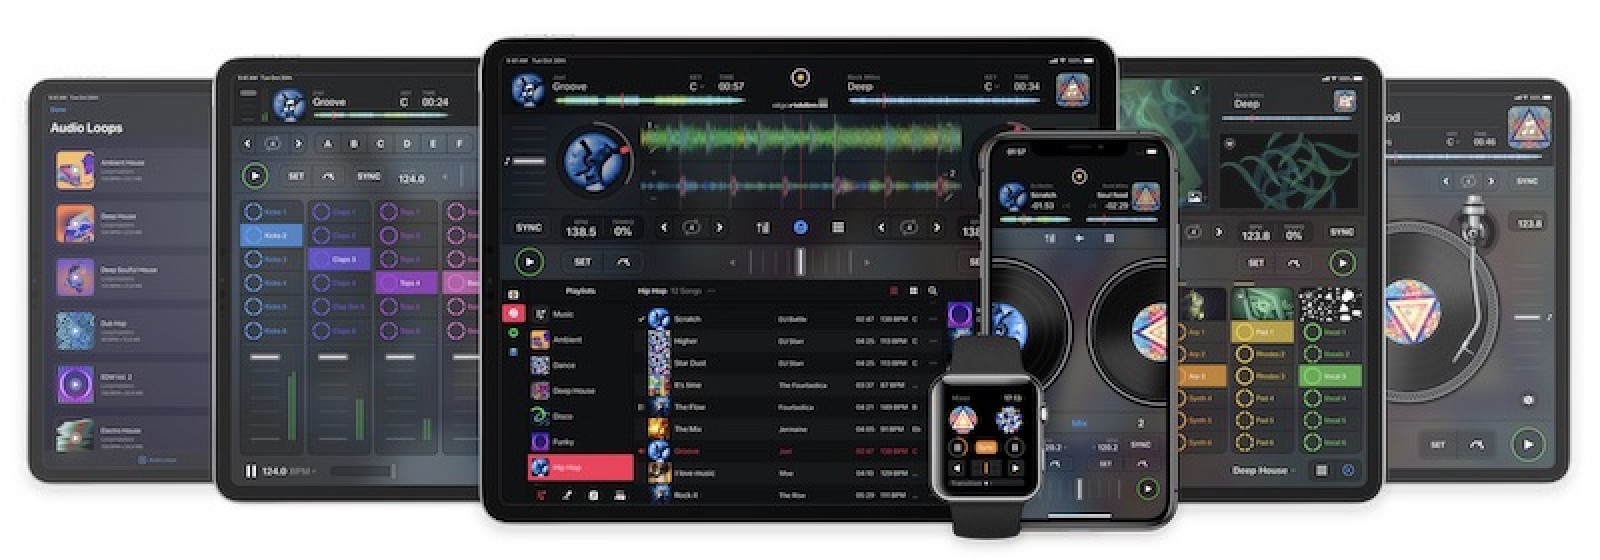 photo of Algoriddim's djay for iOS Goes Free With Optional Pro Subscription, Updated With New Live Performance Tools and More image